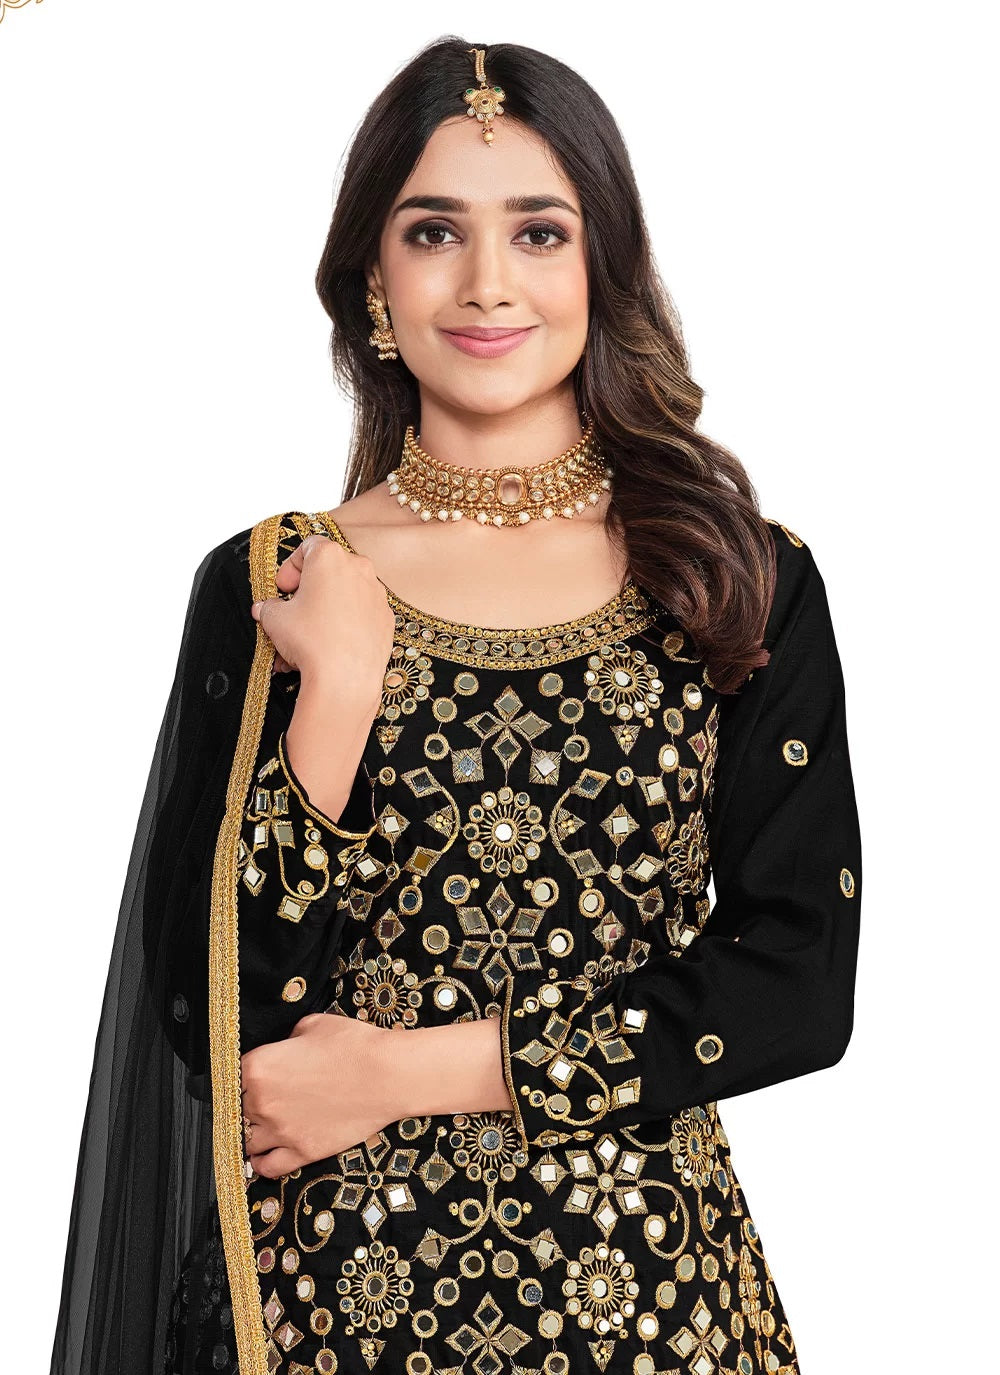 Black Color Punjabi Suit With Embroidery and mirror work